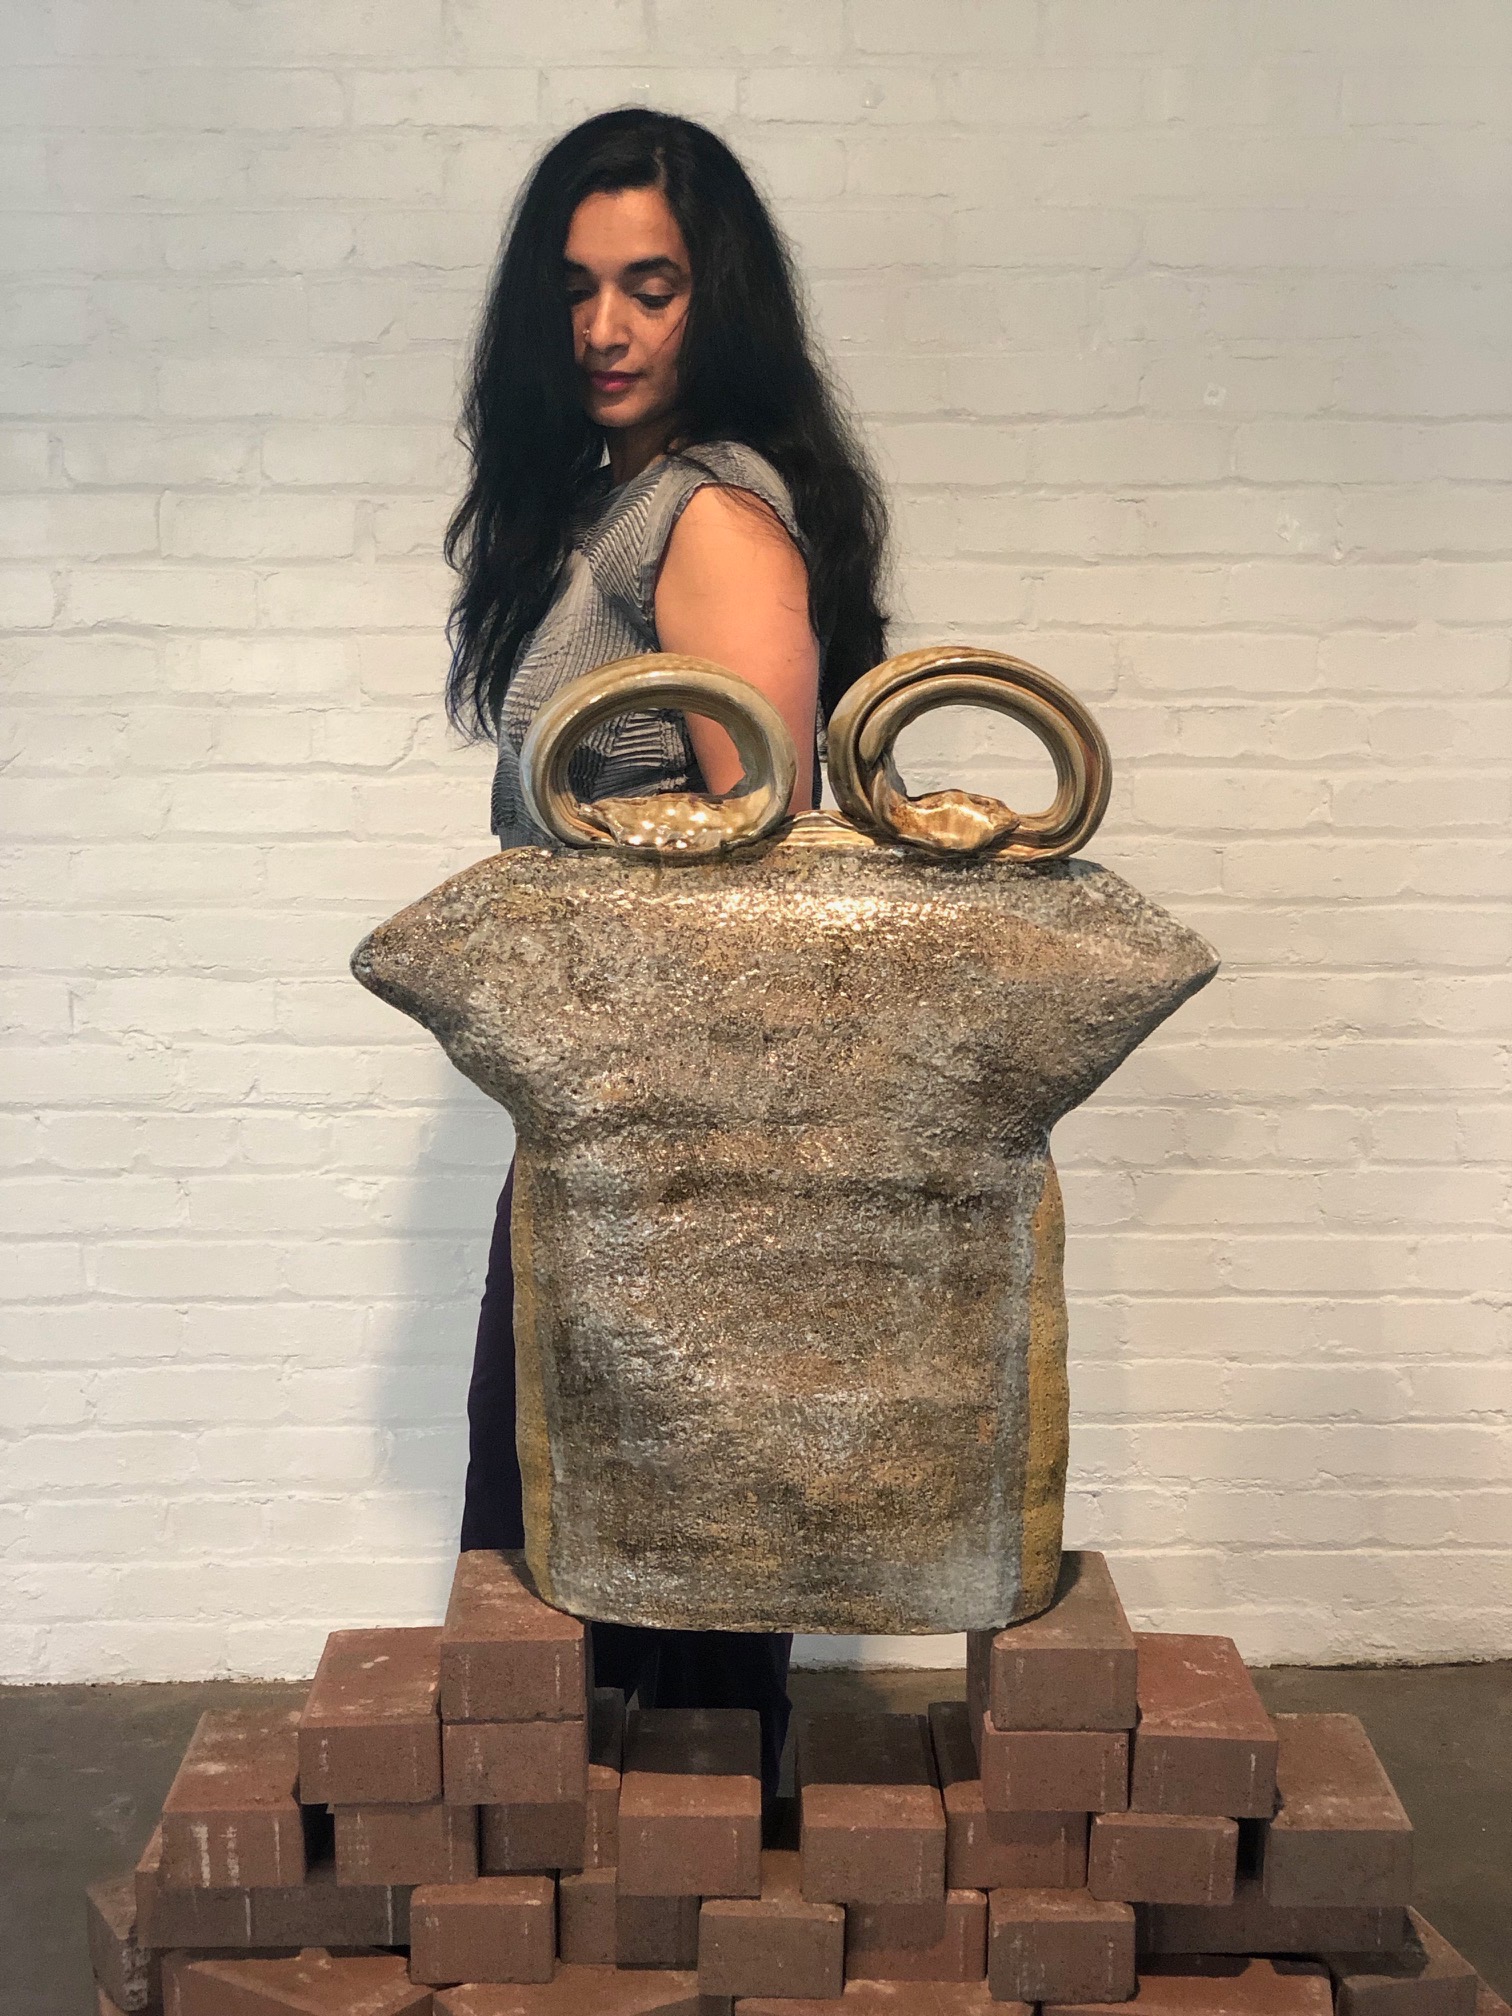  Artist Ashwini Bhat at the opening of her collaboration “Interior Landscape” with Pulitzer prize winning writer Forrest Gander in the Grabhorn Institute gallery, Fall 2019 